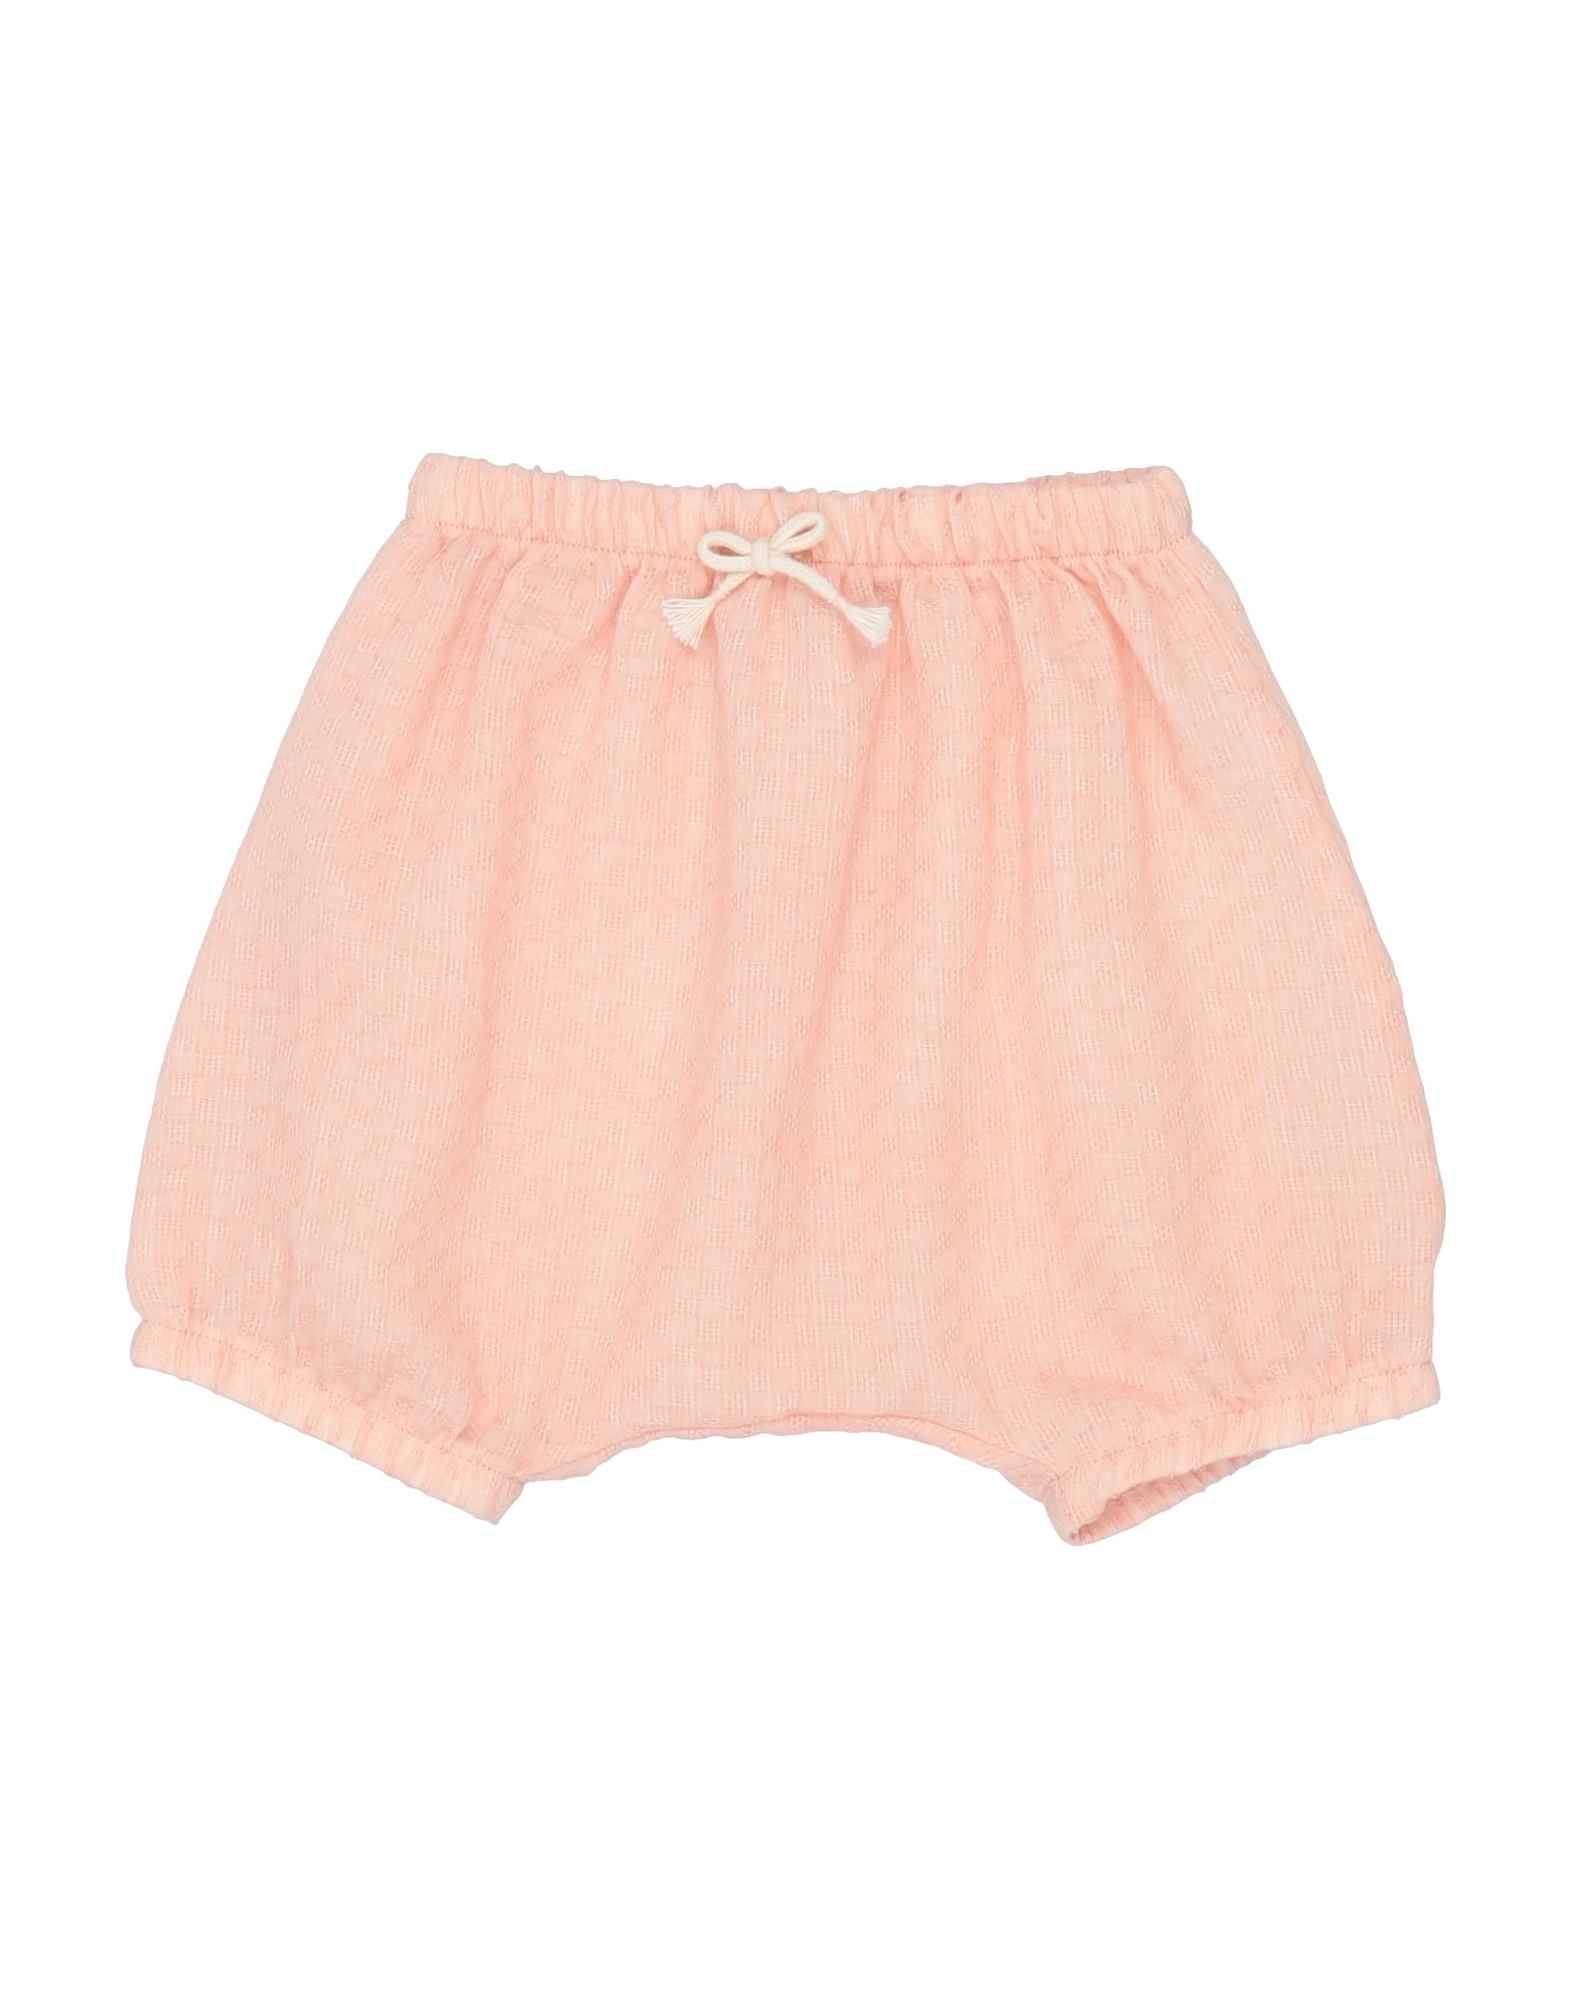 1 + IN THE FAMILY Shorts & Bermudashorts Kinder Lachs von 1 + IN THE FAMILY